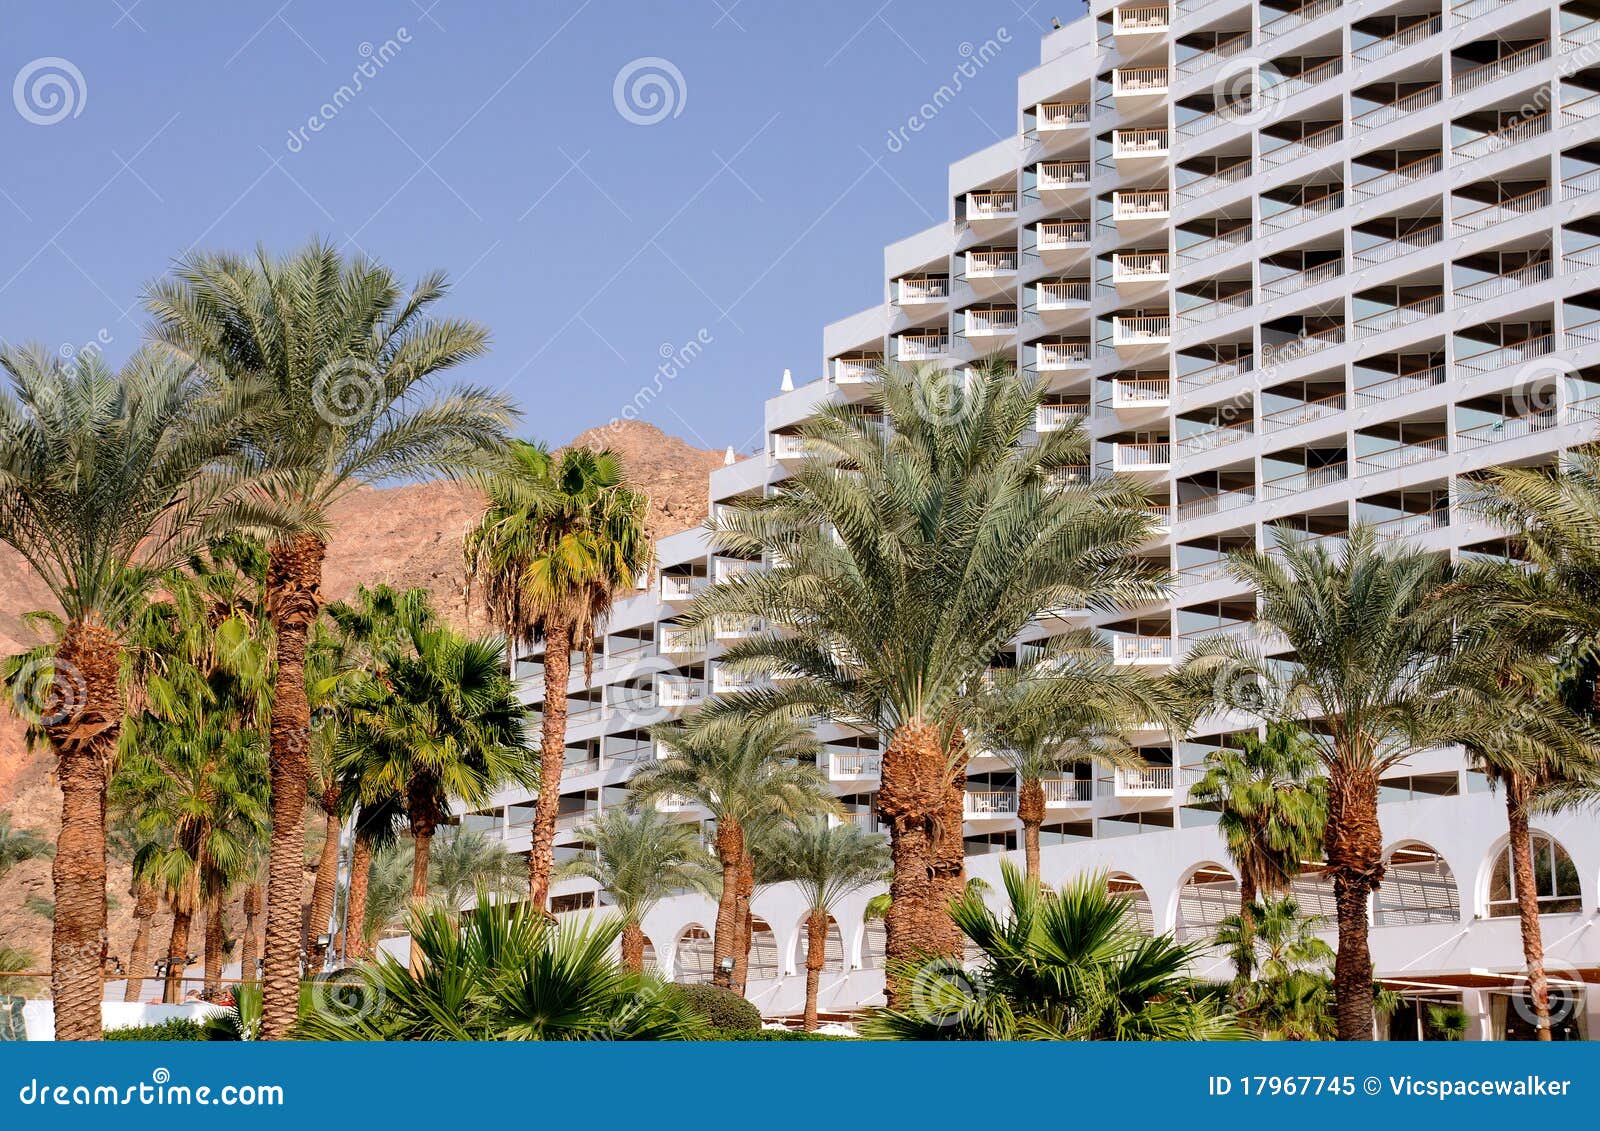 palmtrees and hotel